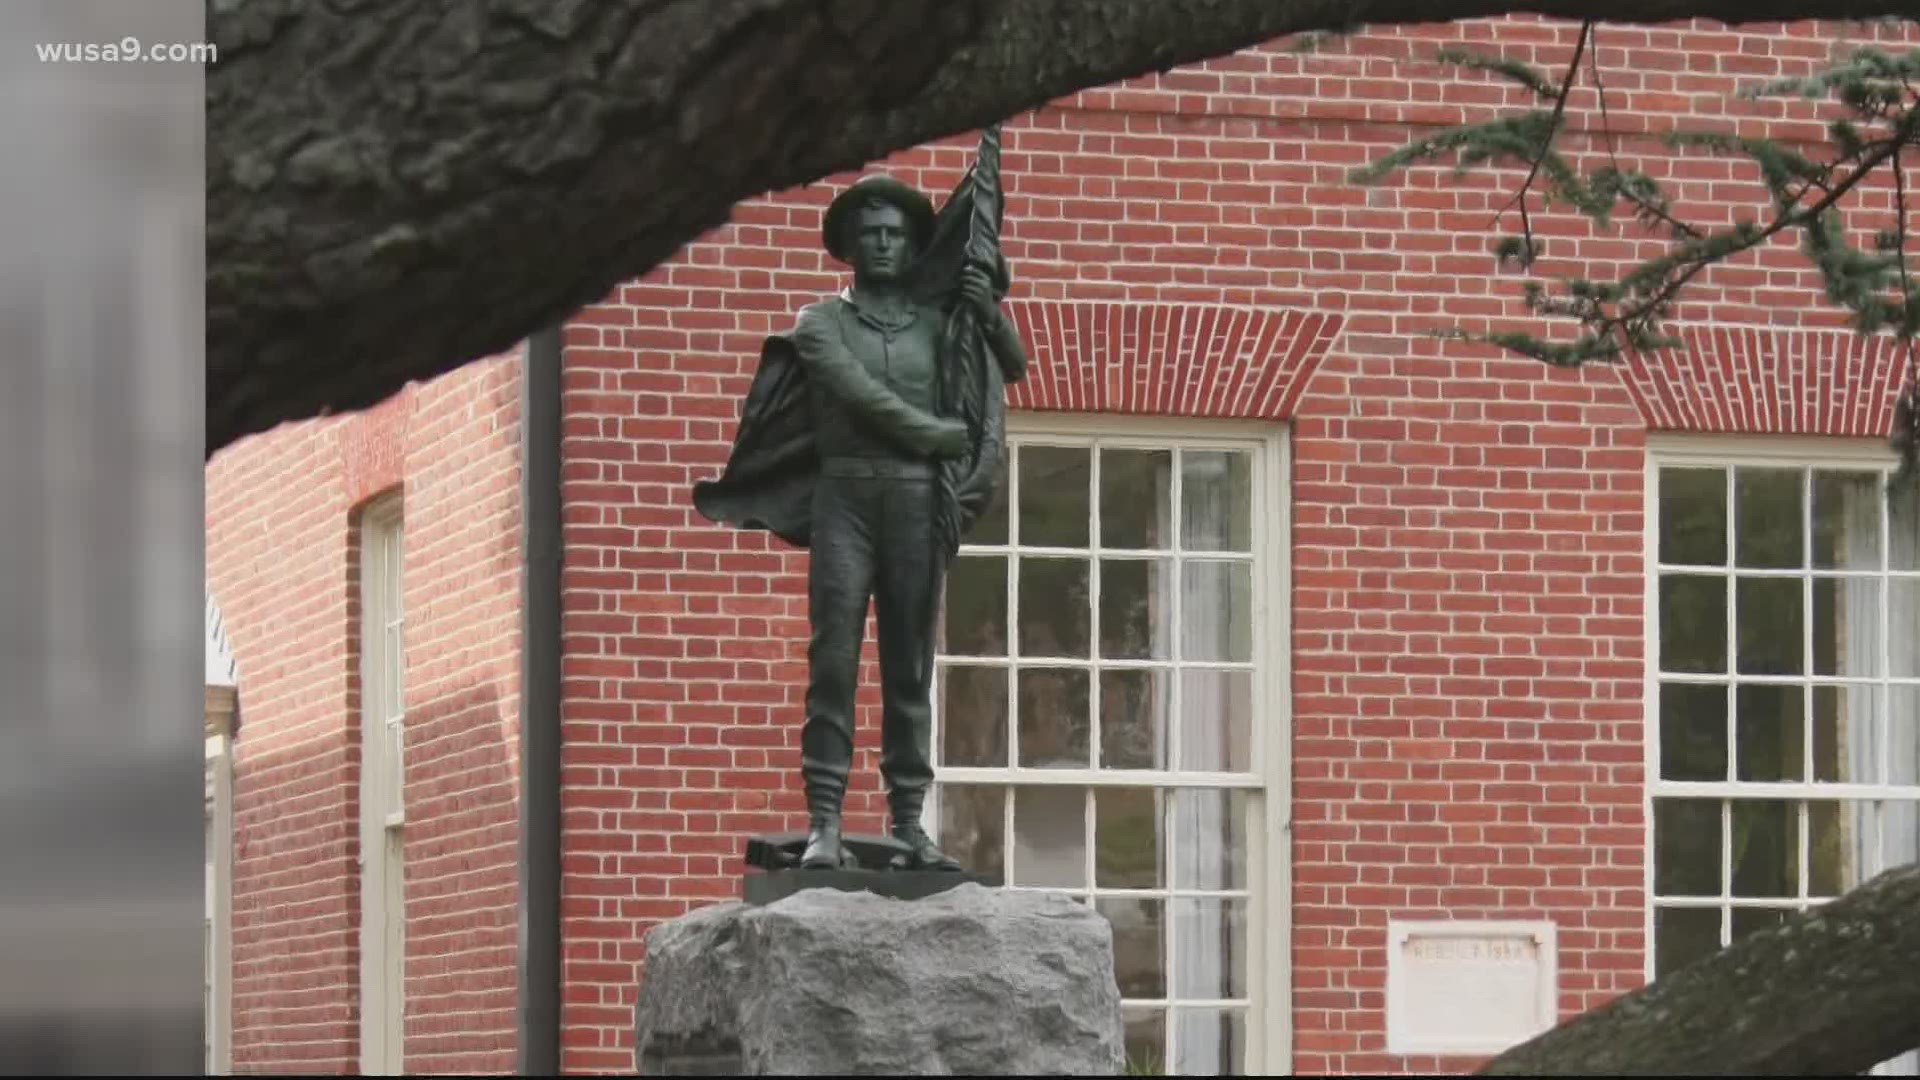 In the past 24 hours, more statues memorializing the confederacy have come down in Virginia. And momentum to do the same in DC and in Maryland is building.